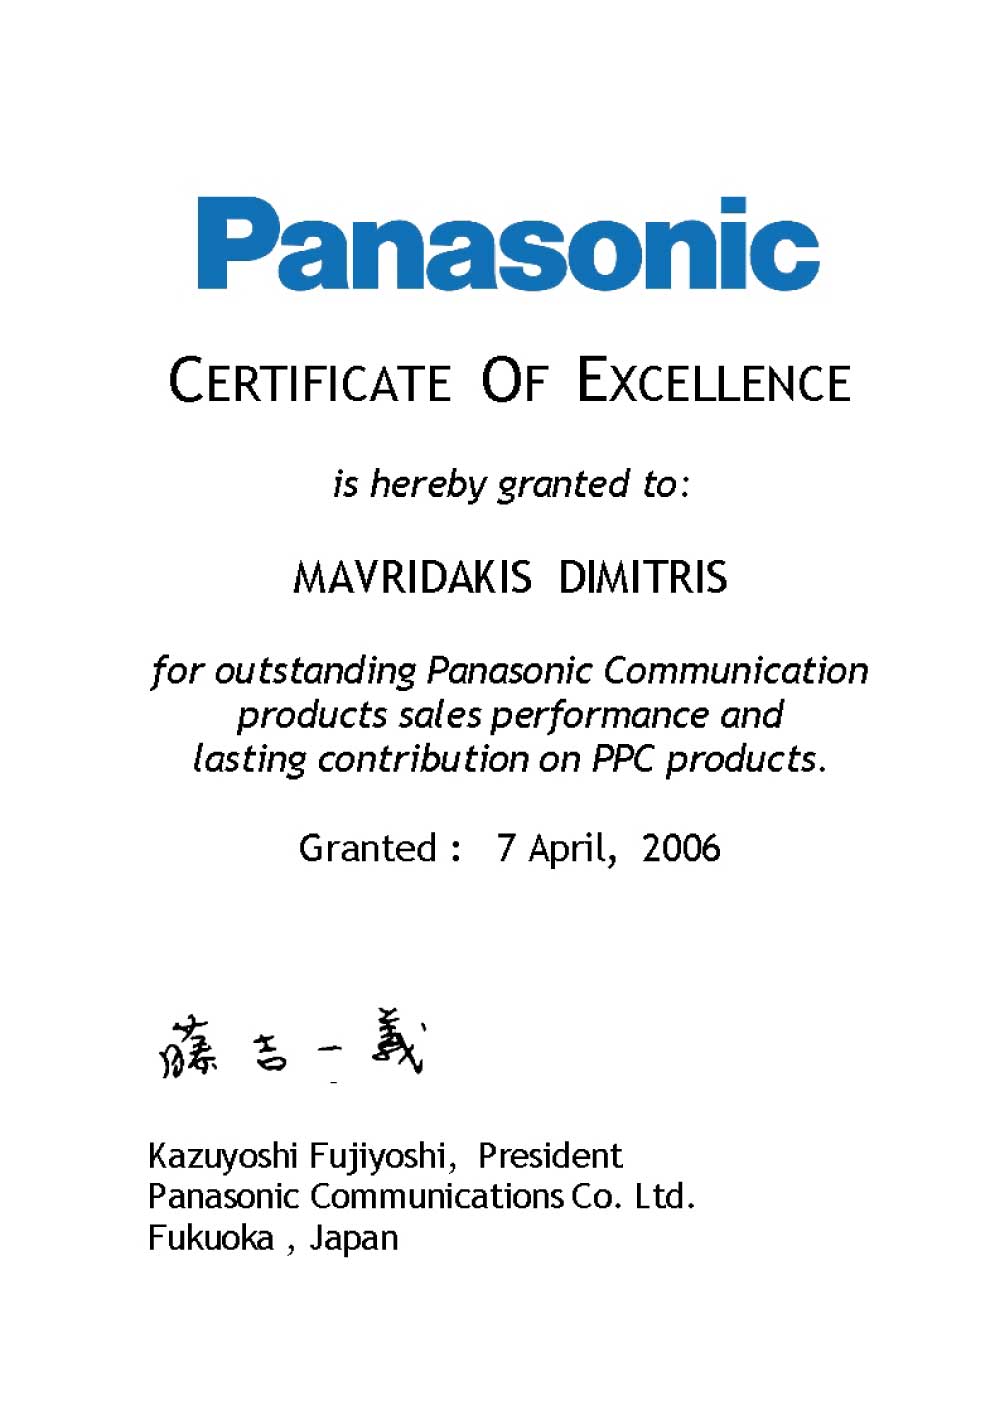 Panasonic - Certificate of excellence